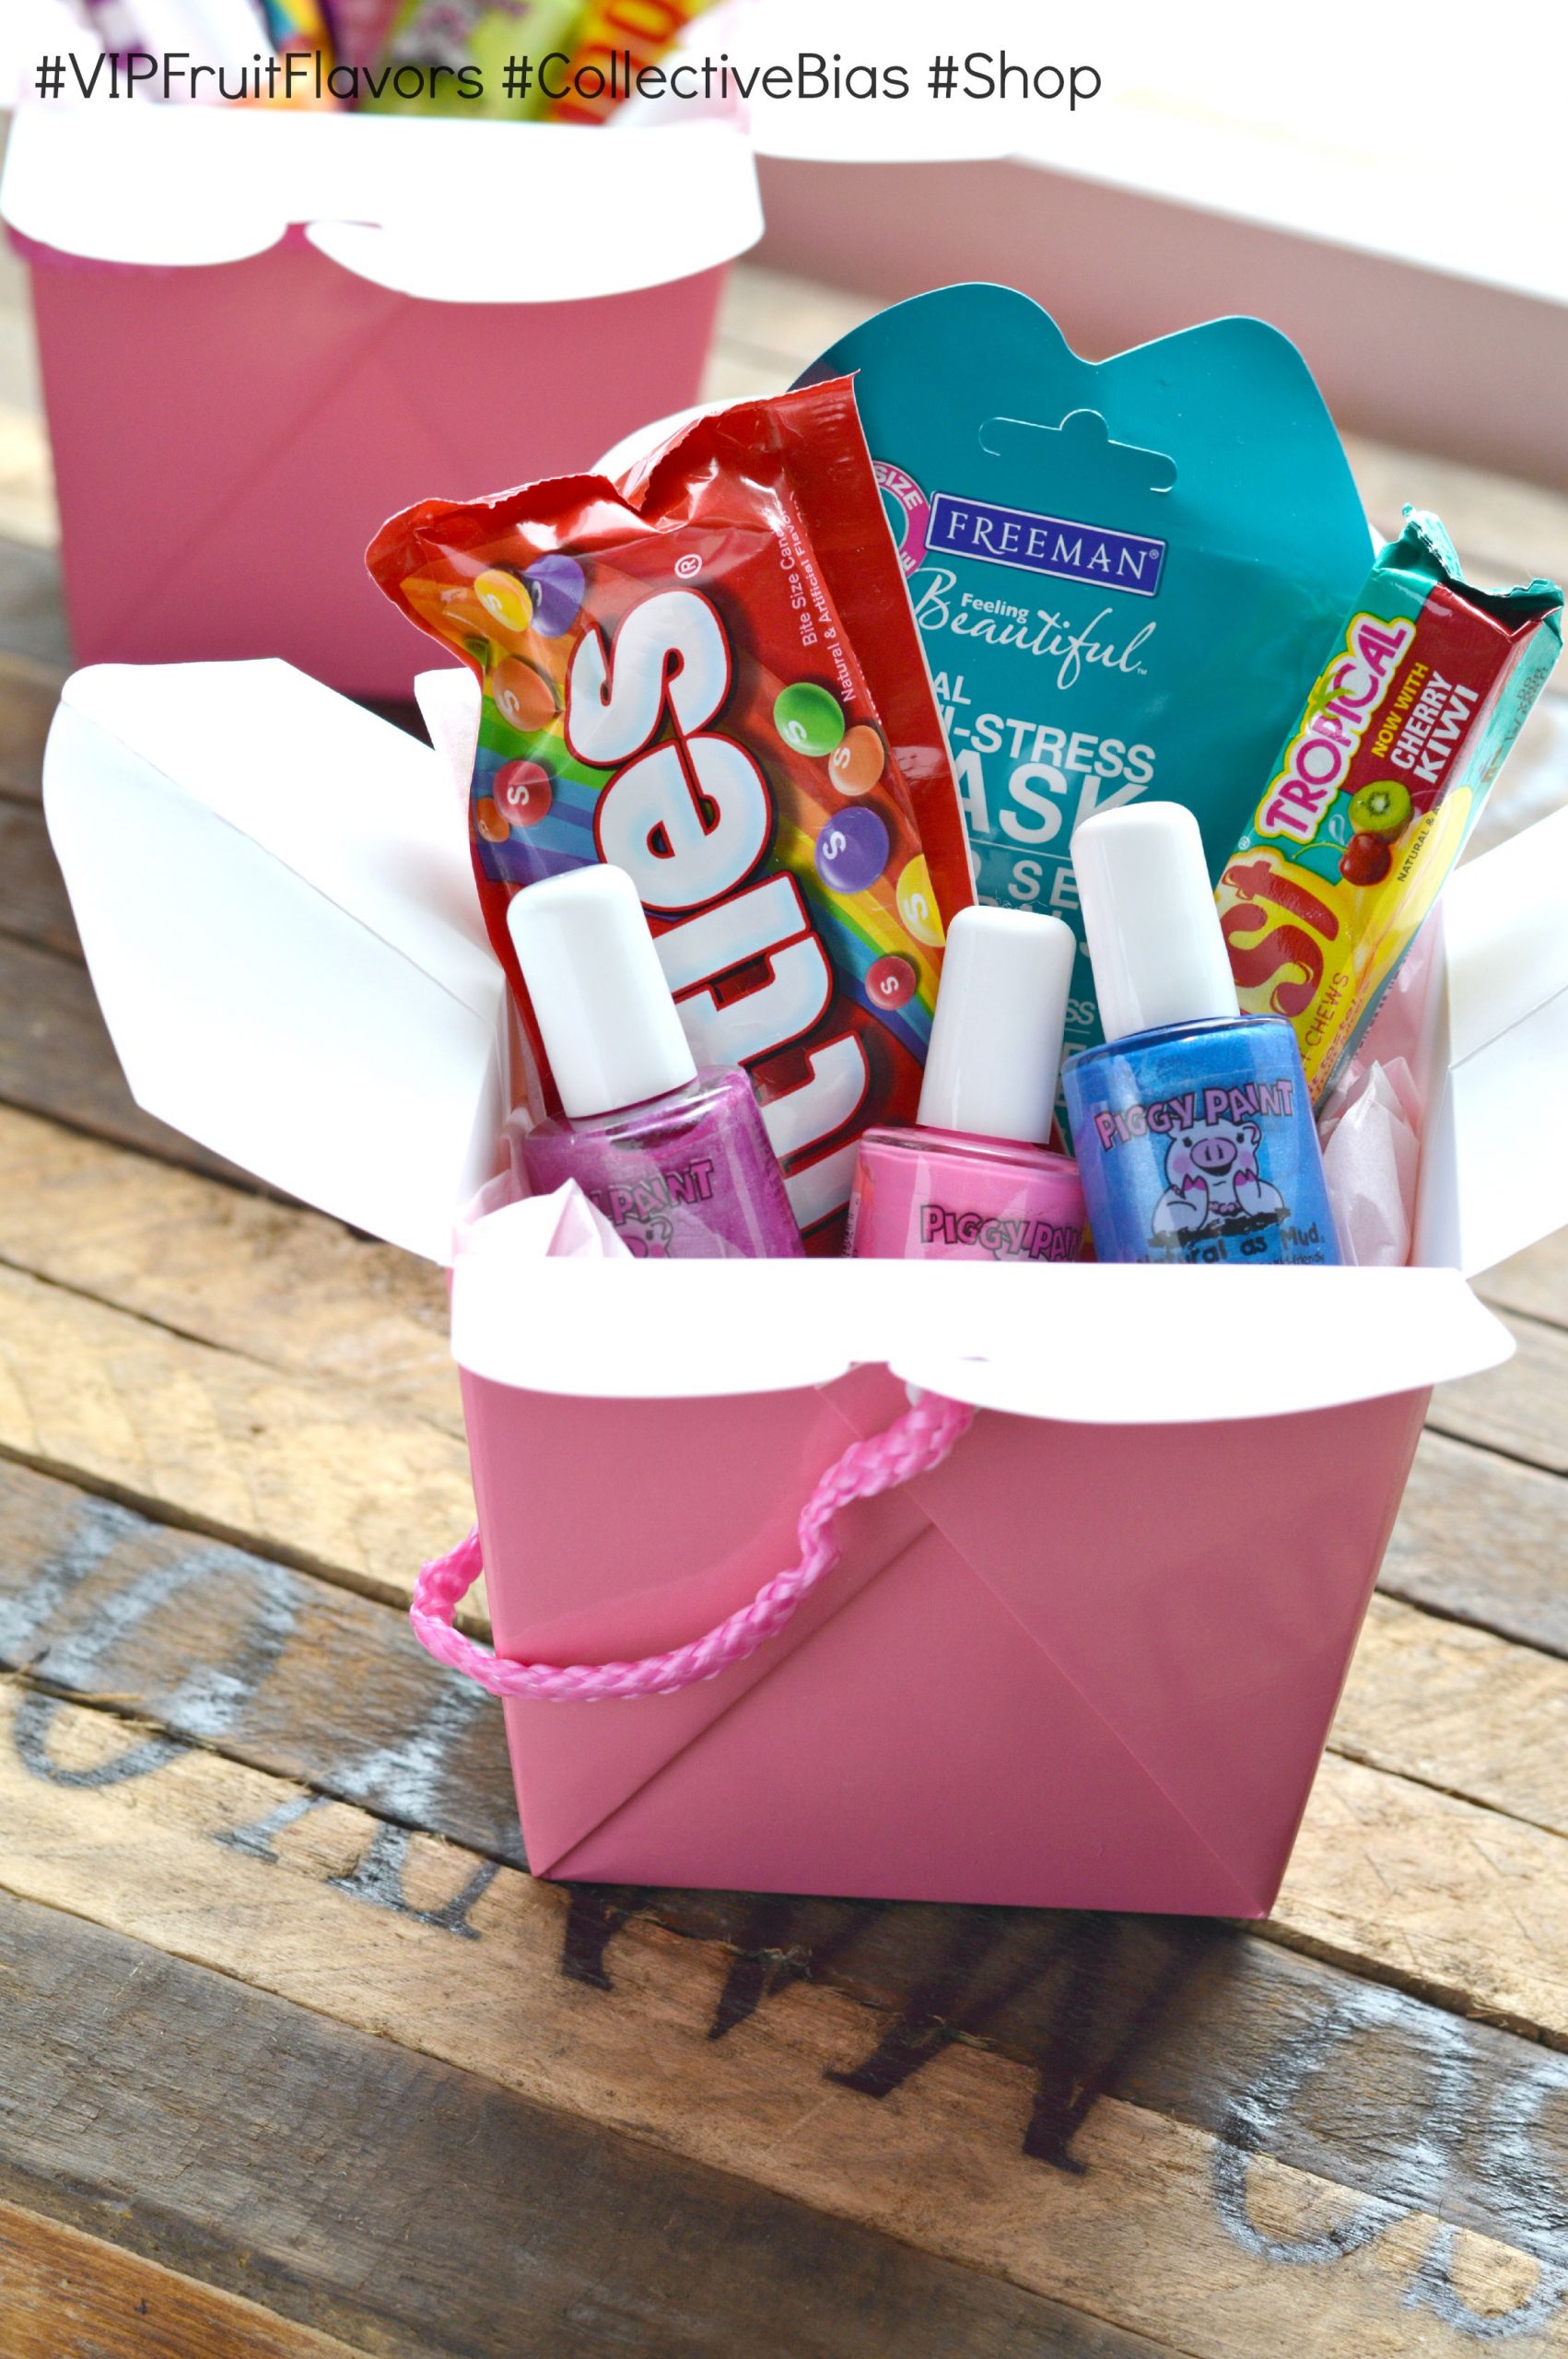 Birthday Gifts DIY
 Skittles & Starburst Make For Awesome DIY Gifts It s